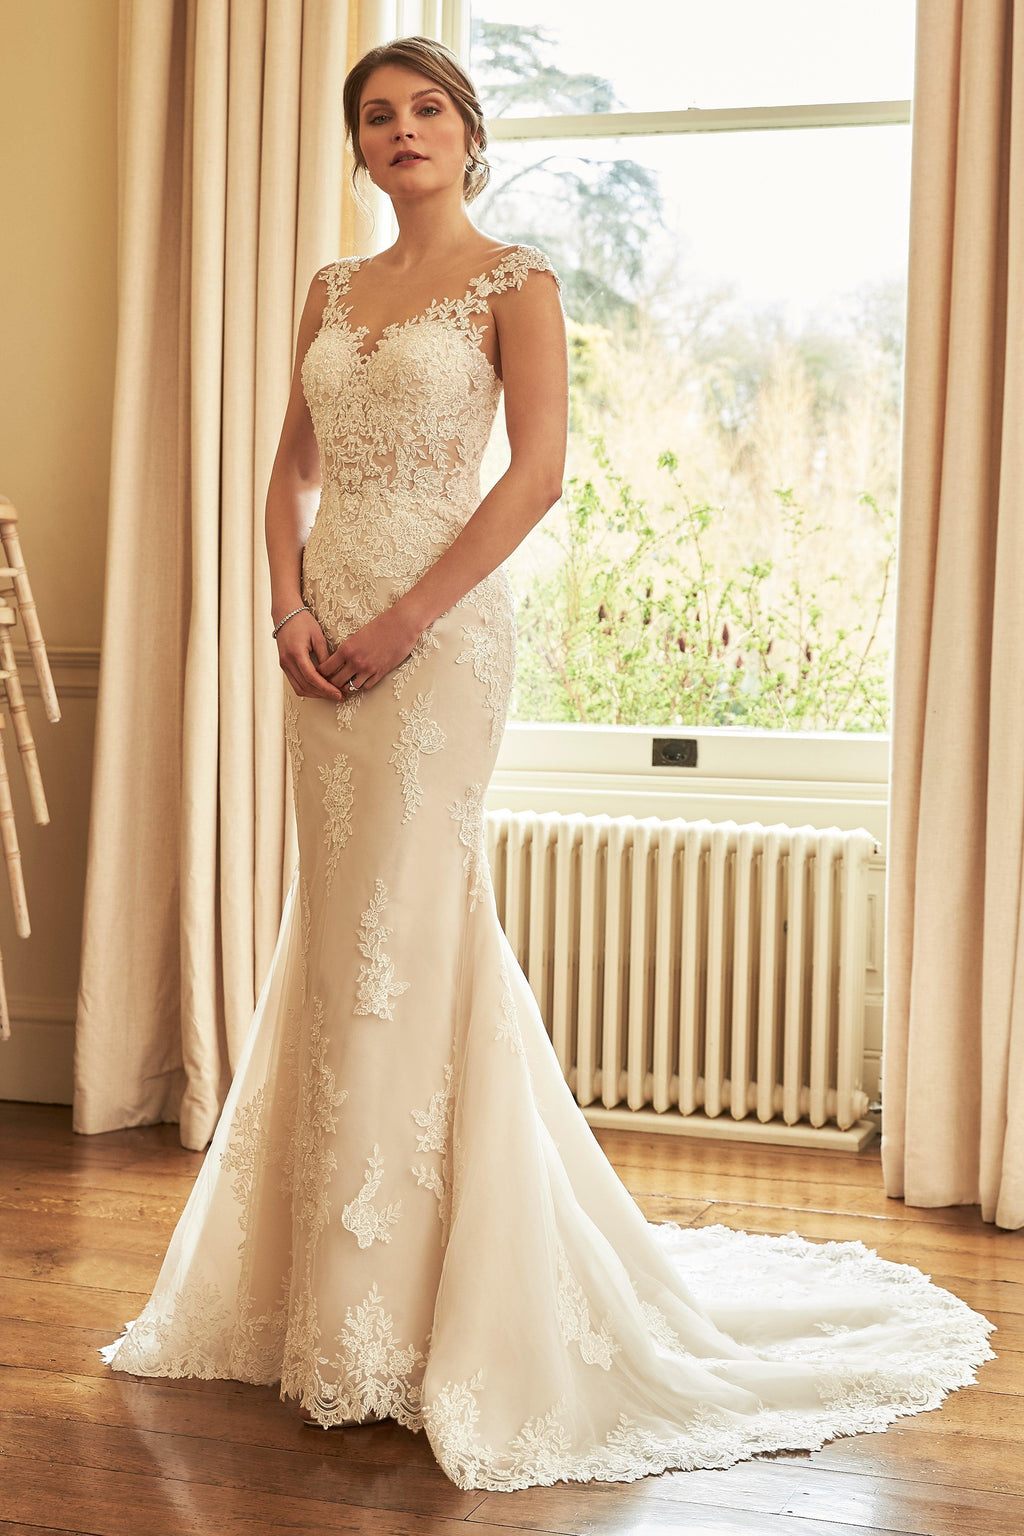 UK20 Taylor - Adore Bridal and Occasion Wear